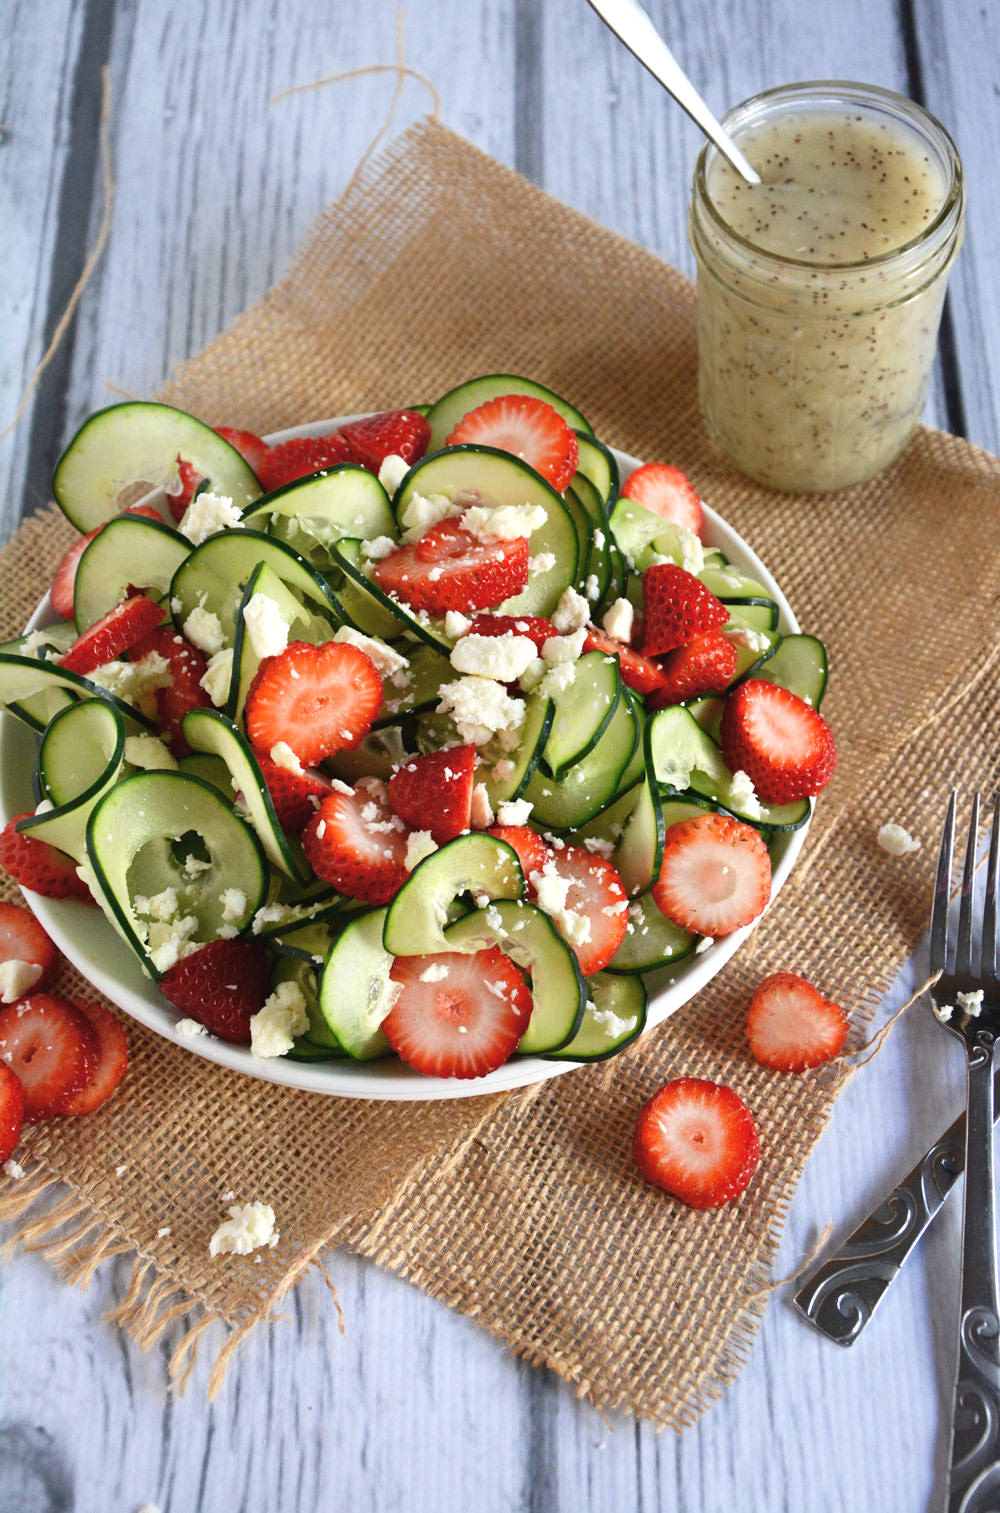 A refreshing and crisp salad with spiralized cucumbers, juicy strawberries and feta salad all topped with a fruity poppyseed dressing!